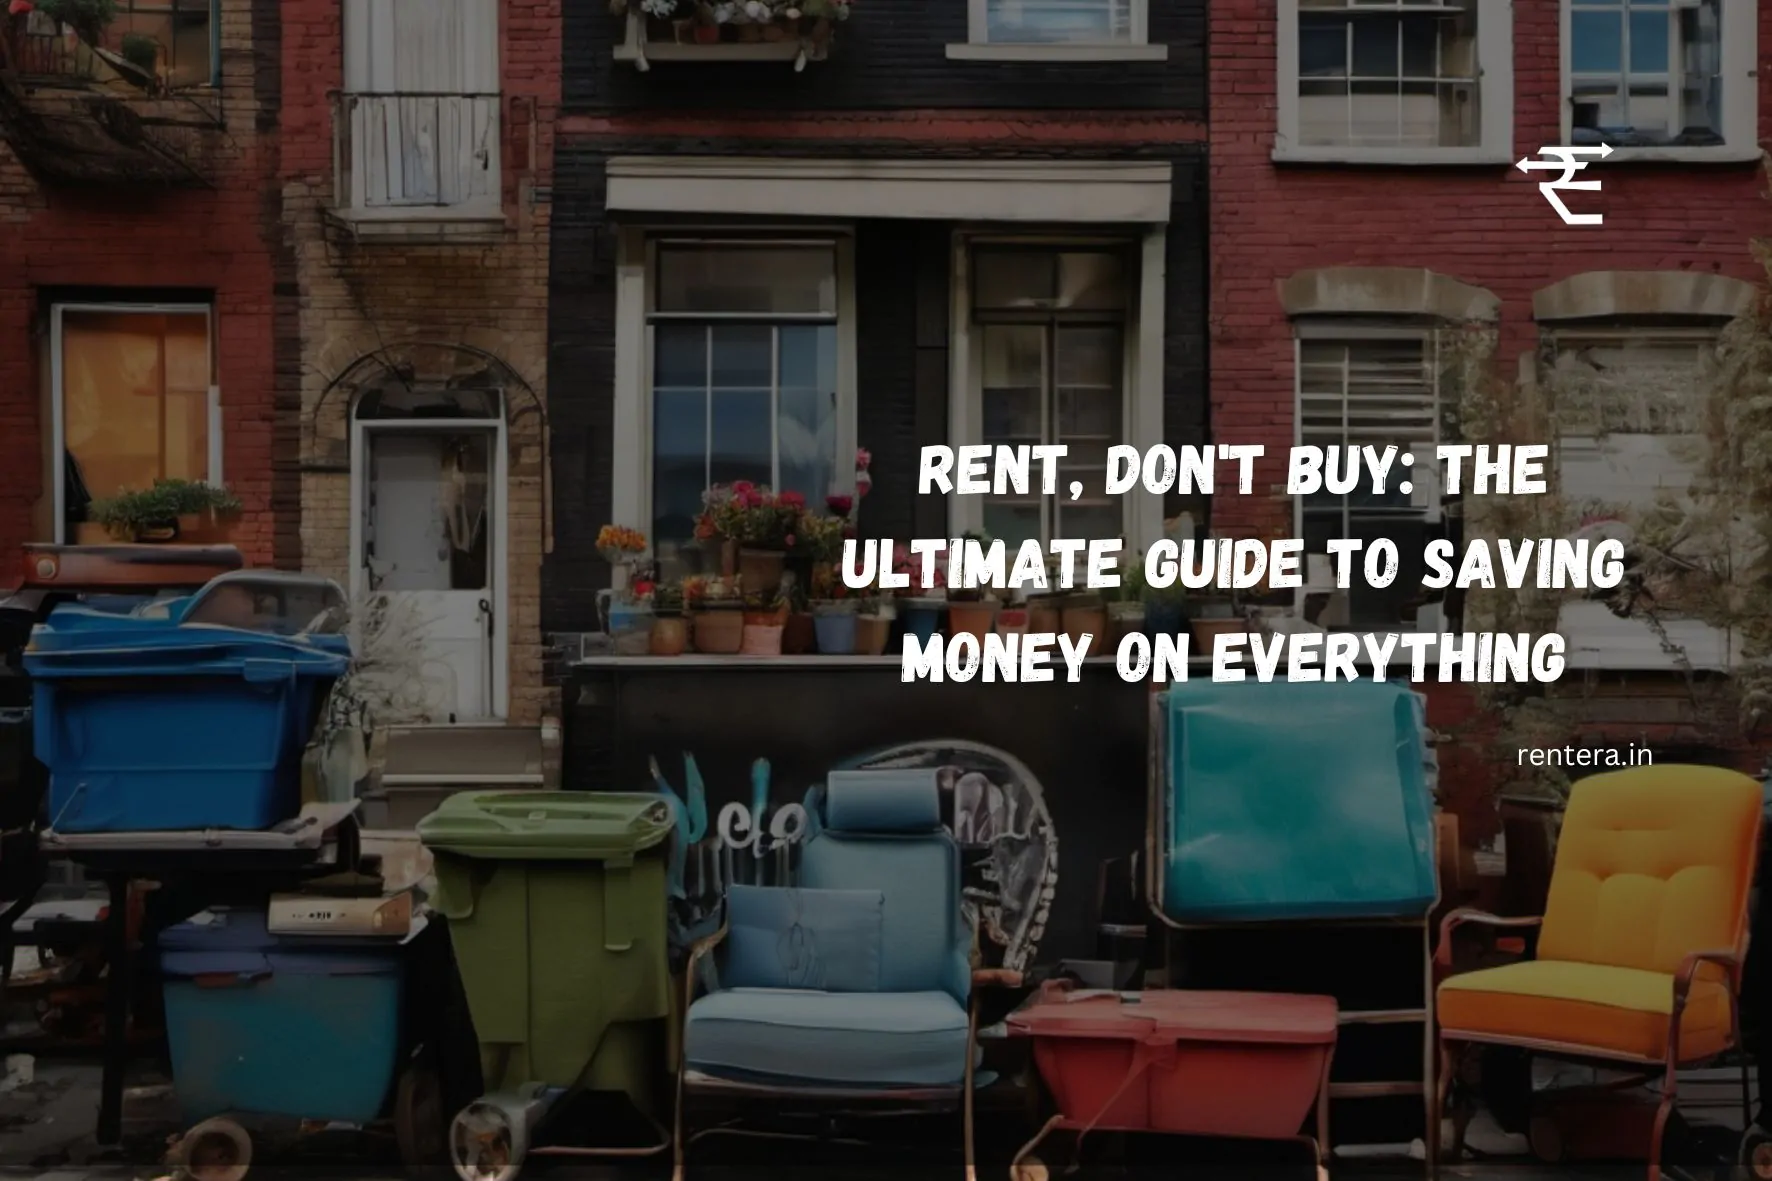 Rent, Don’t Buy: The Ultimate Guide to Saving Money on Everything